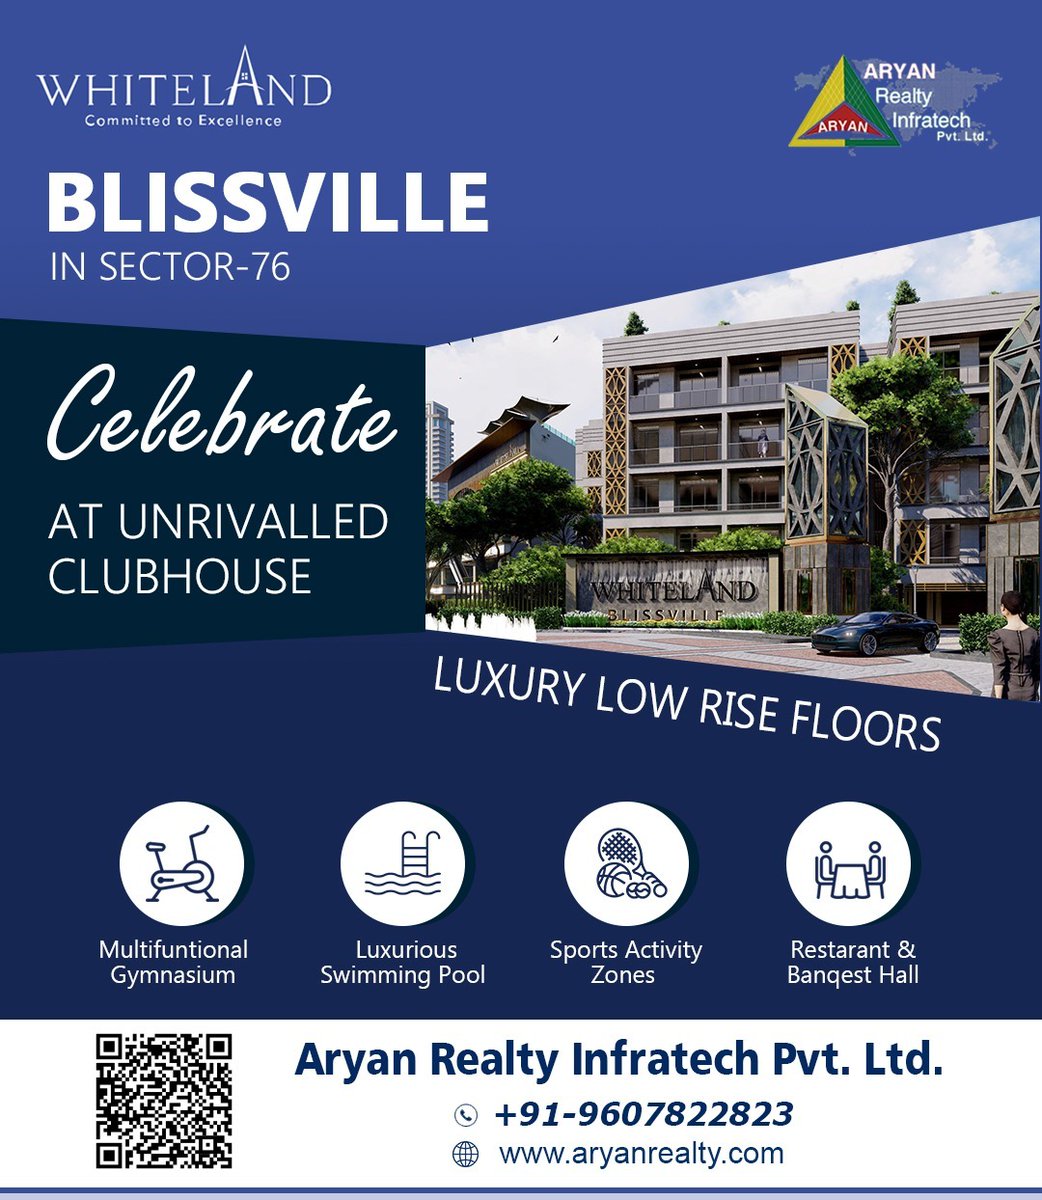 Whiteland Blissville in Sector-76
Luxury Low Rise Floors

Celebrate At Unrivalled Clubhouse

#aryanrealtyinfratech #whiteland #Launches #Sector76  #architecture #luxury #homes #newhome #property #Gurgaon #Sector76Gurgaon #commercialproperty #luxuryhomes